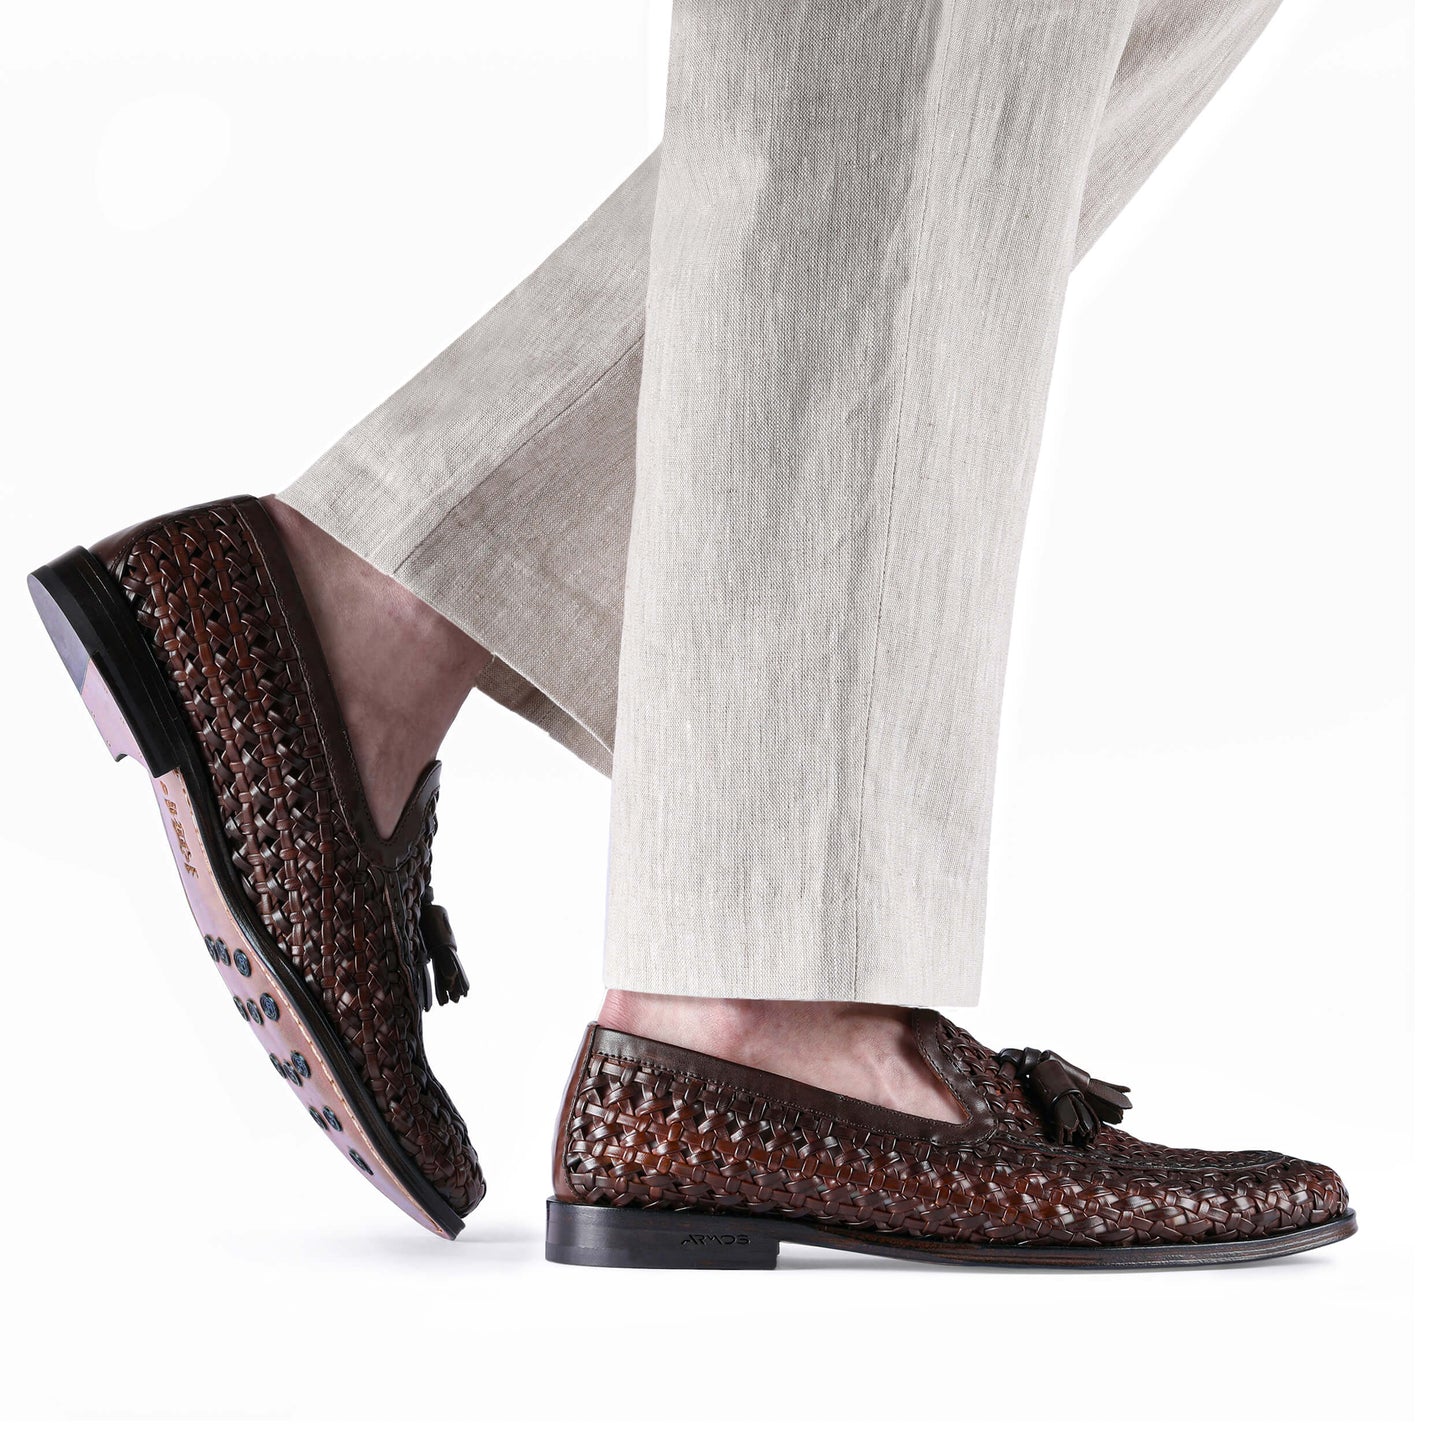 Woven loafers